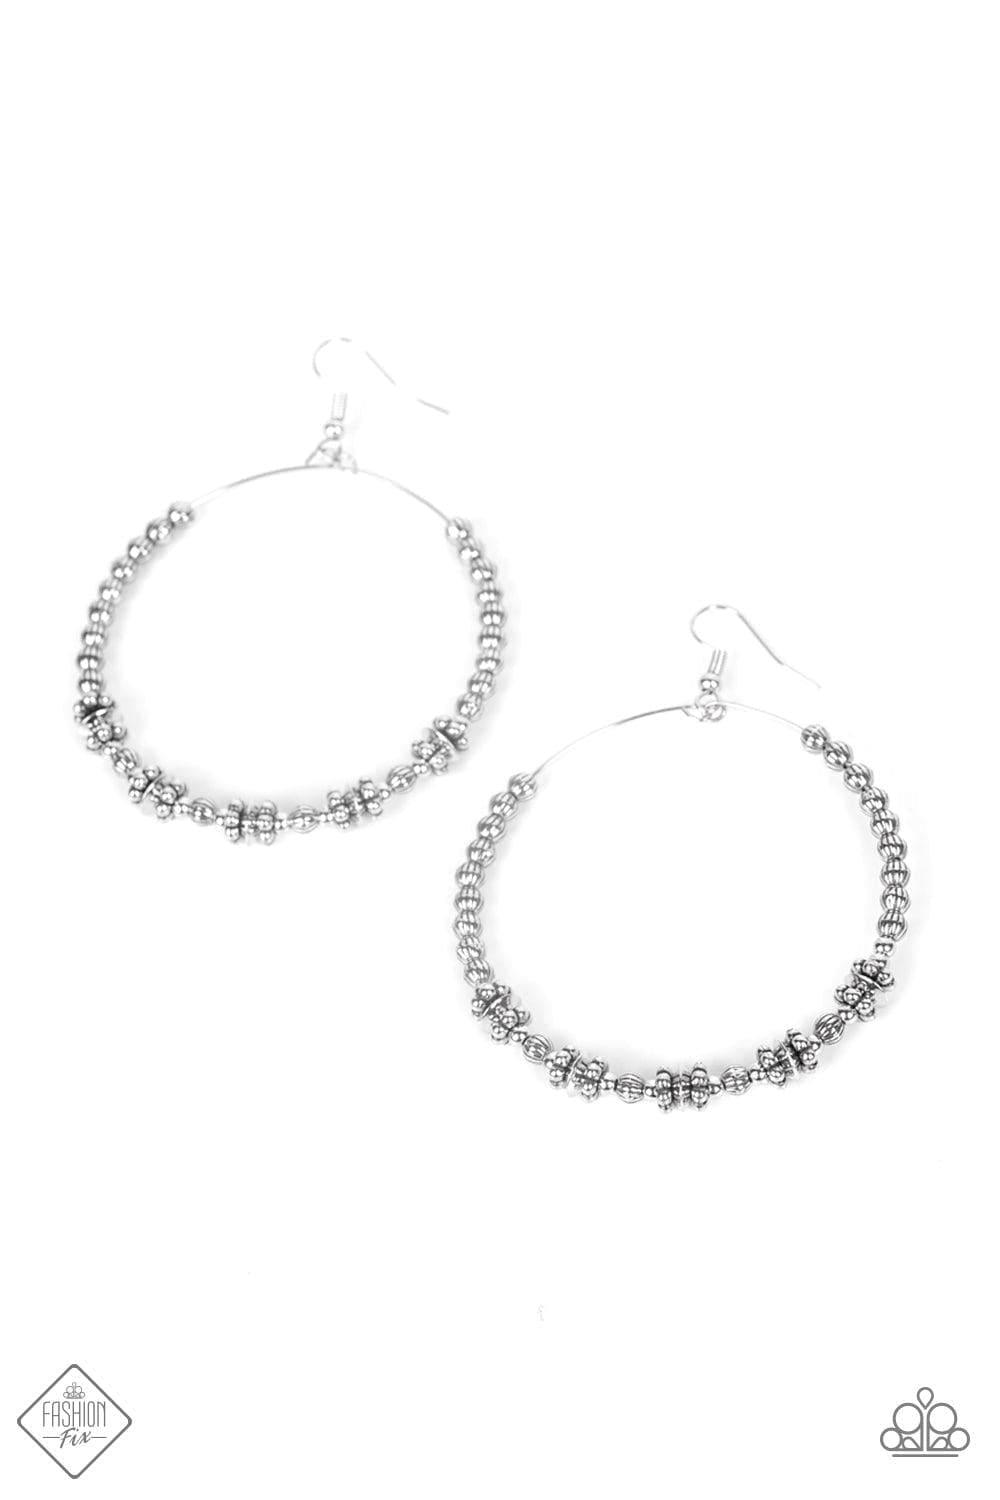 Paparazzi Accessories - Simple Synchrony - Silver Earrings - Bling by JessieK